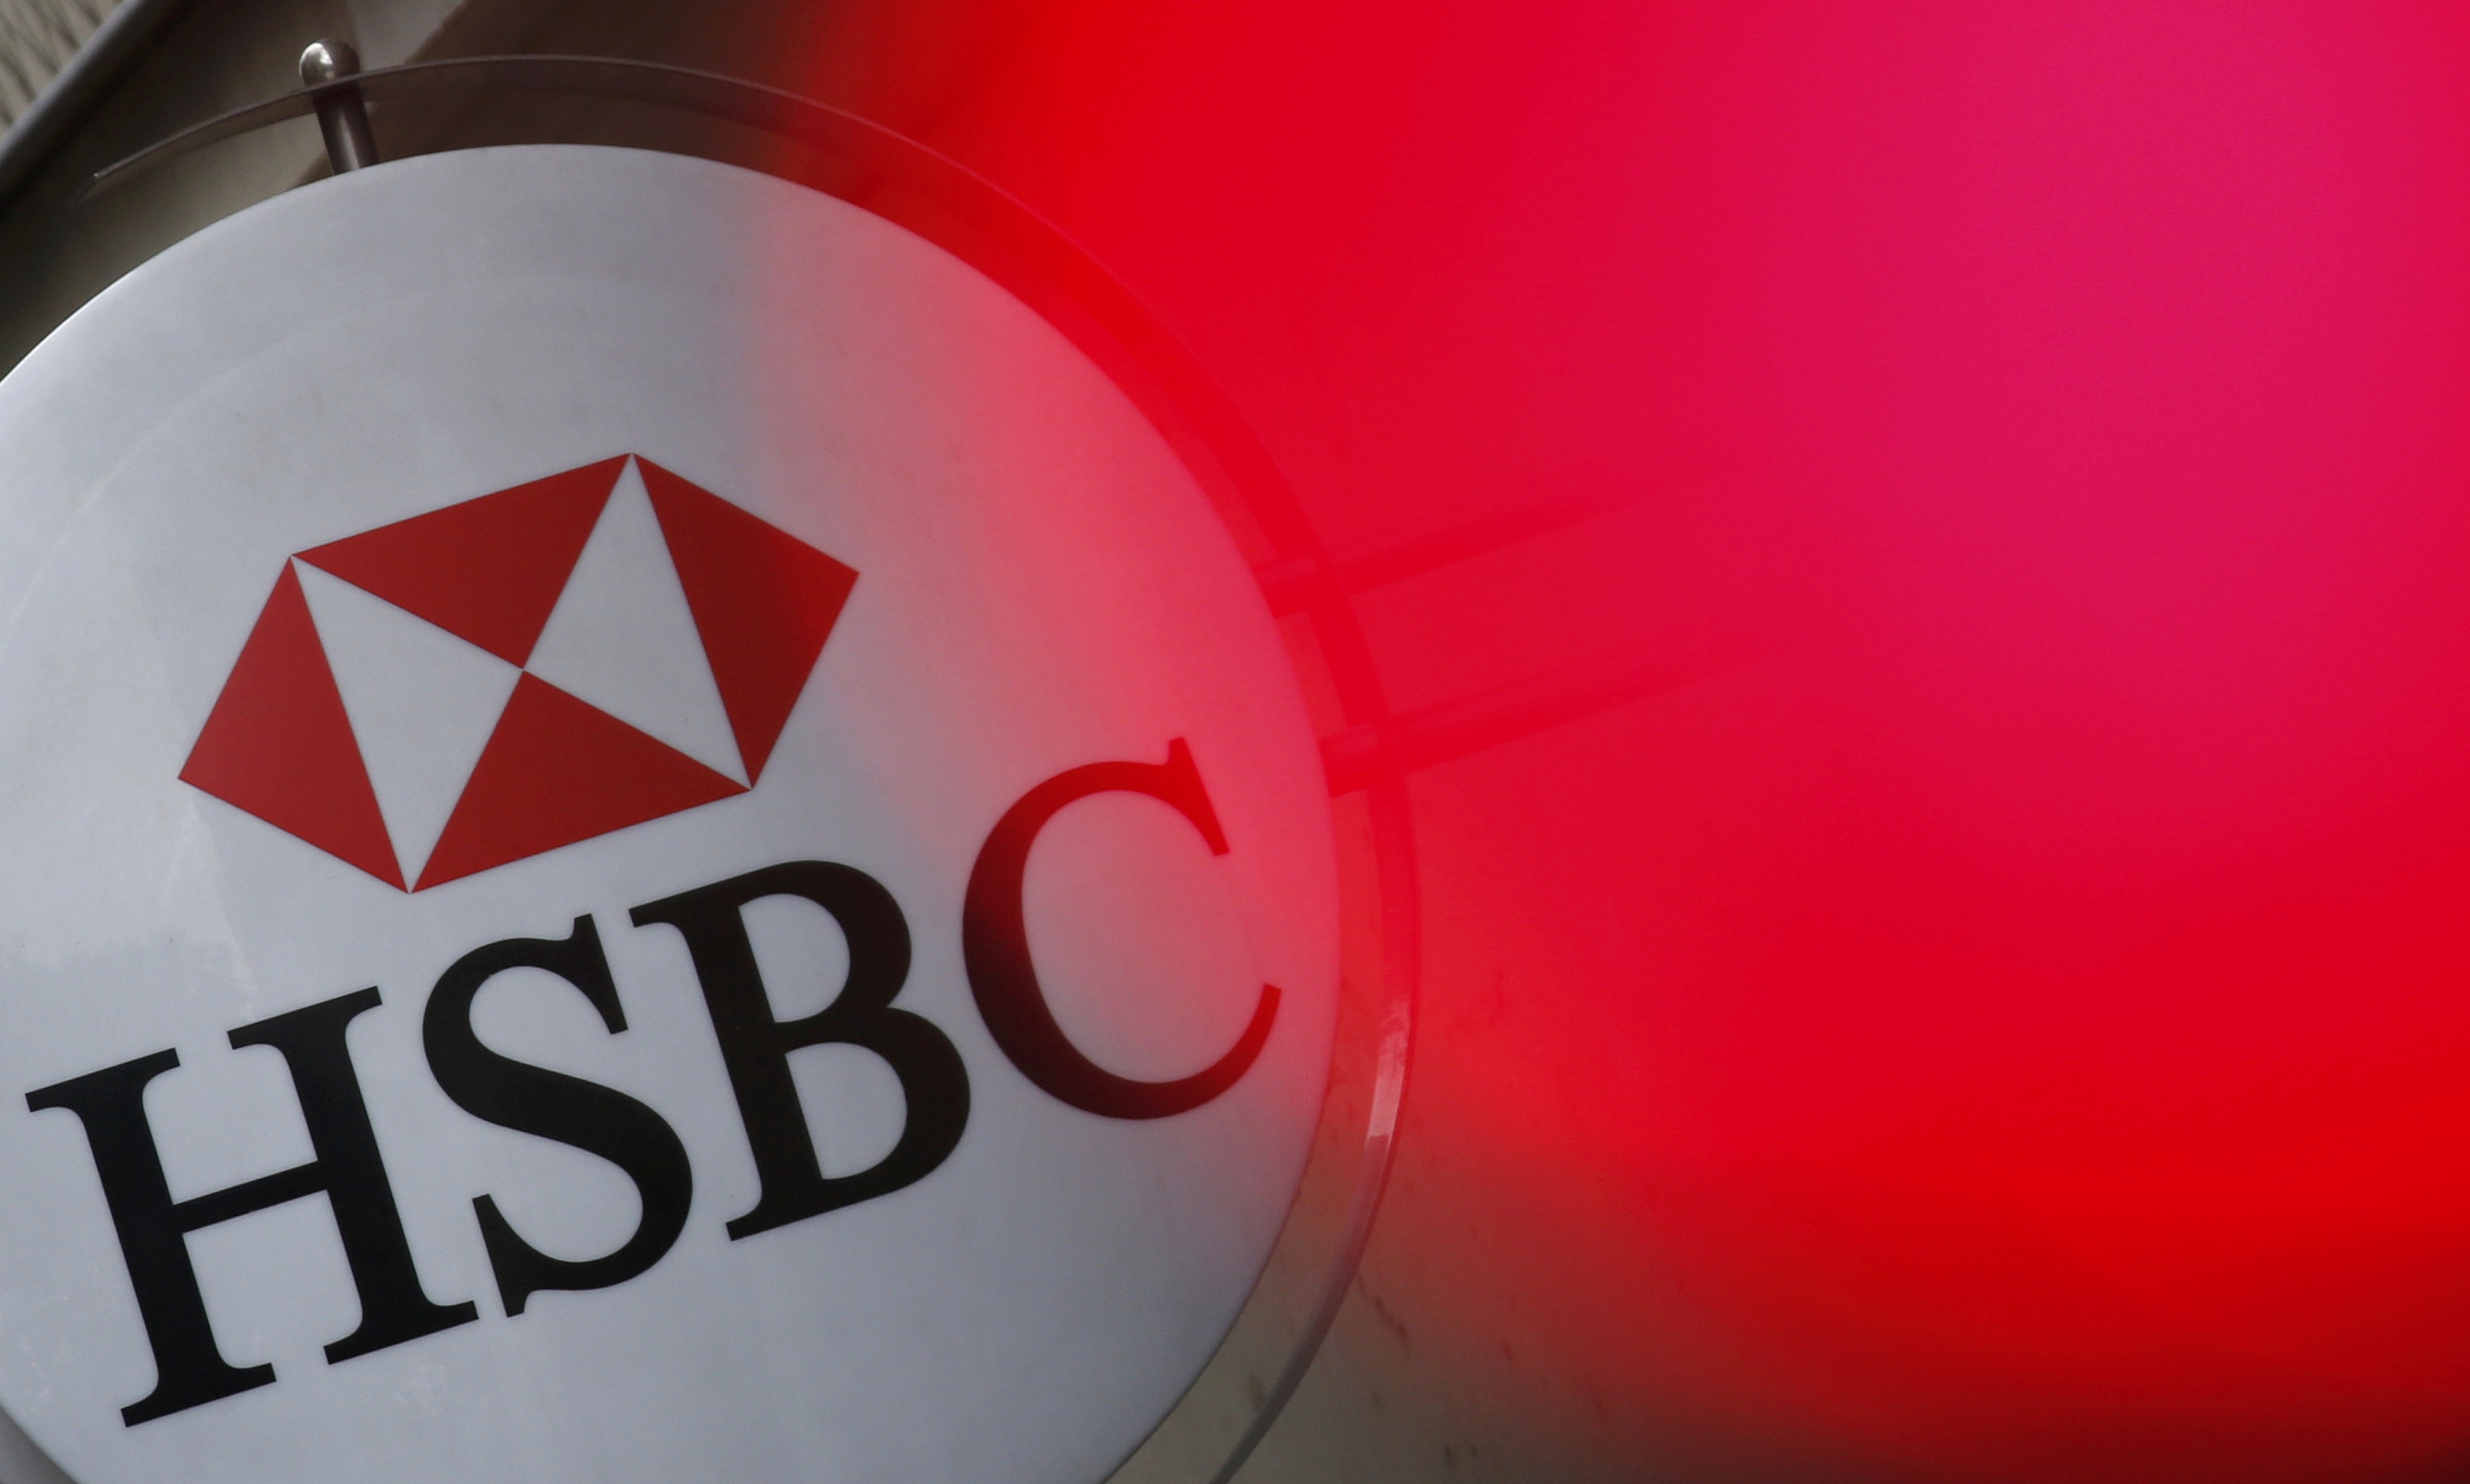 An HSBC bank logo is illuminated by a traffic light in France as global lenders may find it would better to get smaller in a post-2008 crisis environment. Photo: Reuters